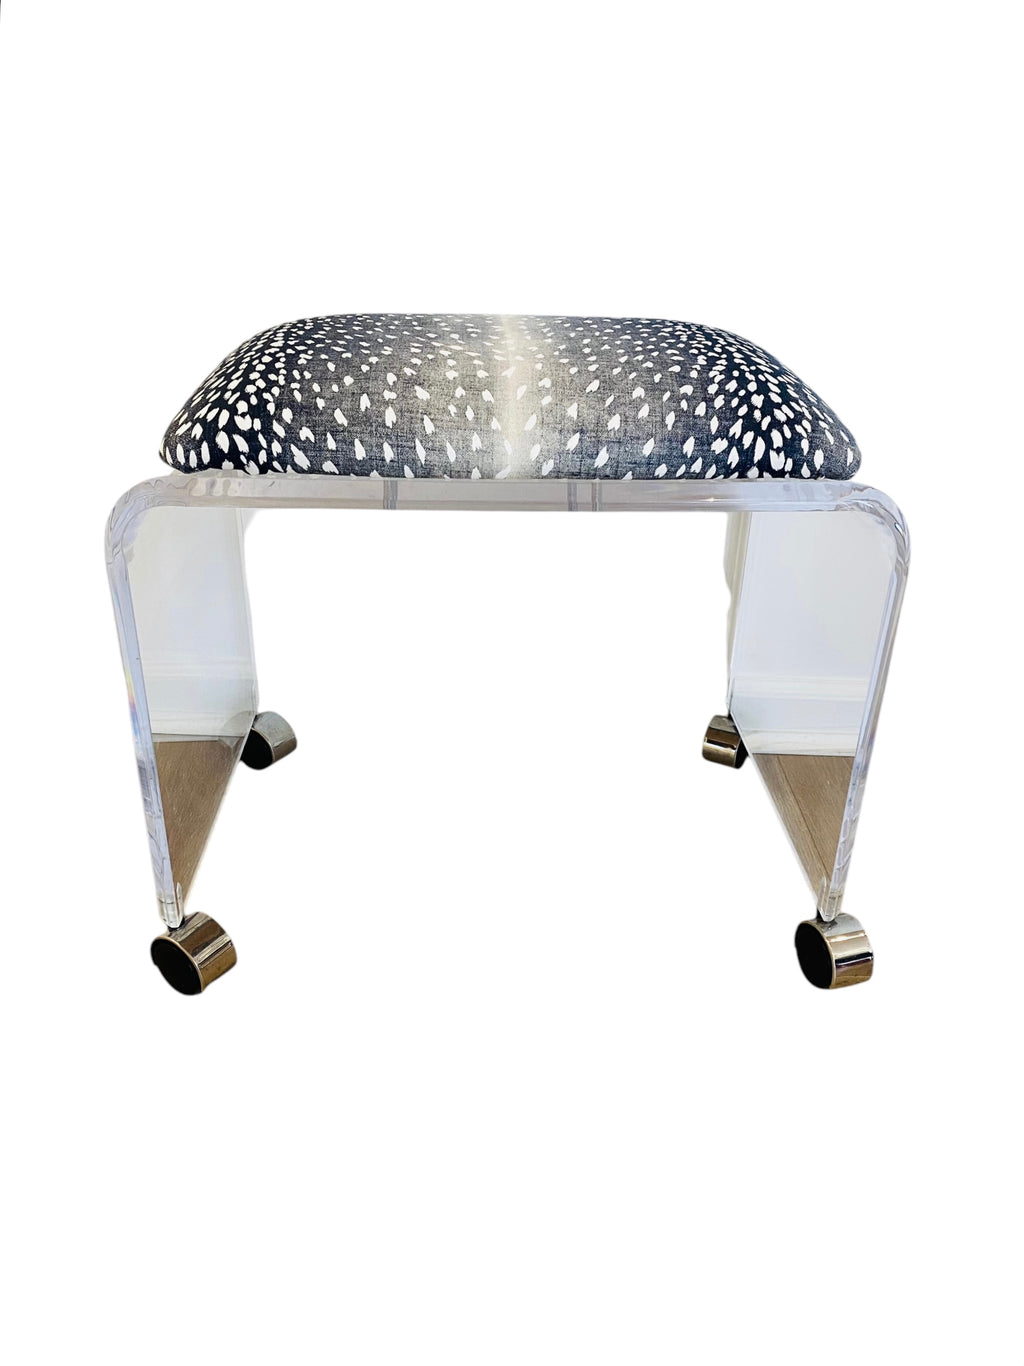 Reworked vintage Lucite Waterfall Stool on Casters, Antelope Fabric